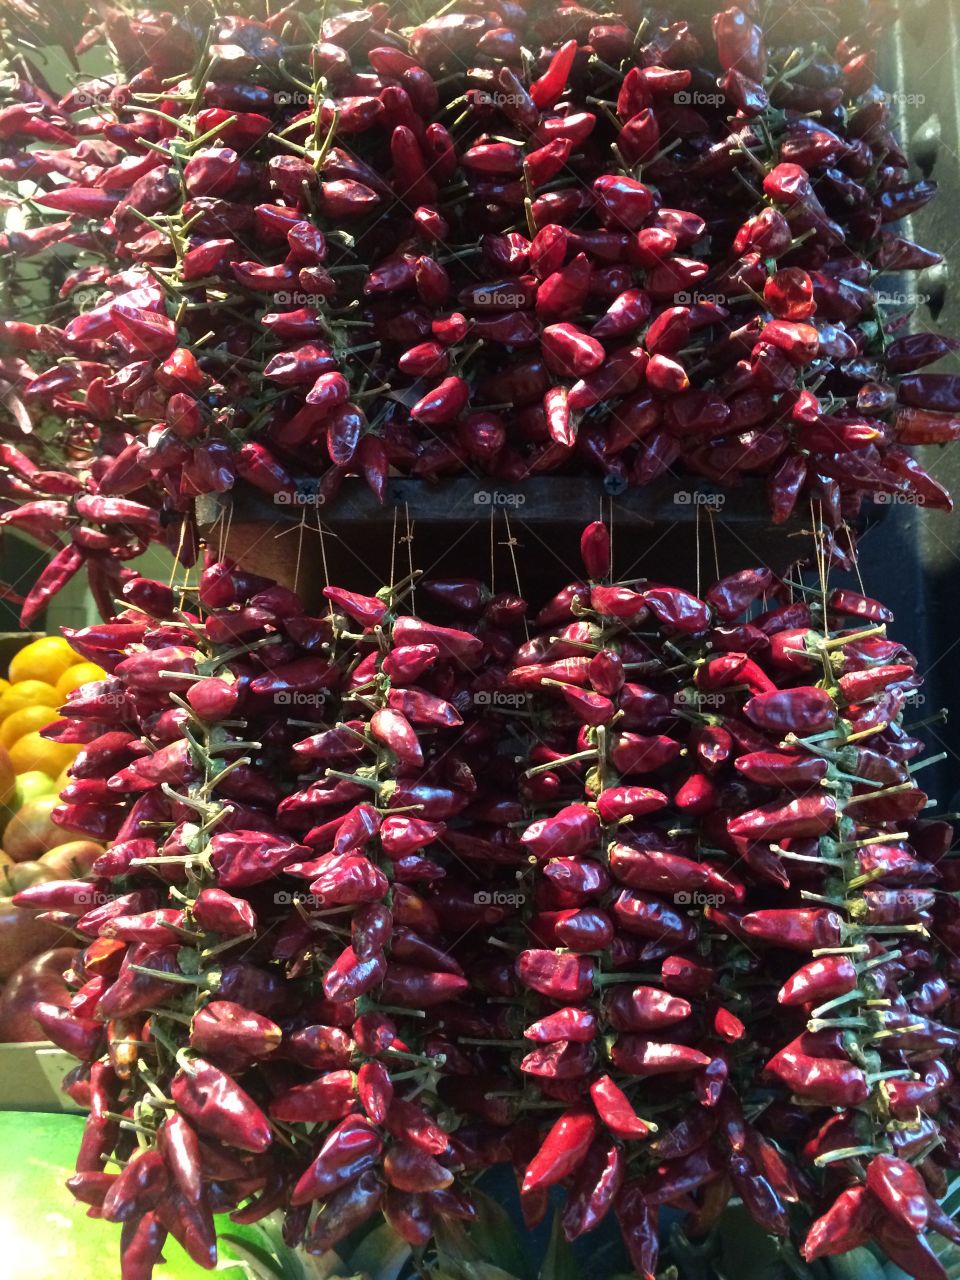 Hungarian chili peppers in a Budapest marketplace